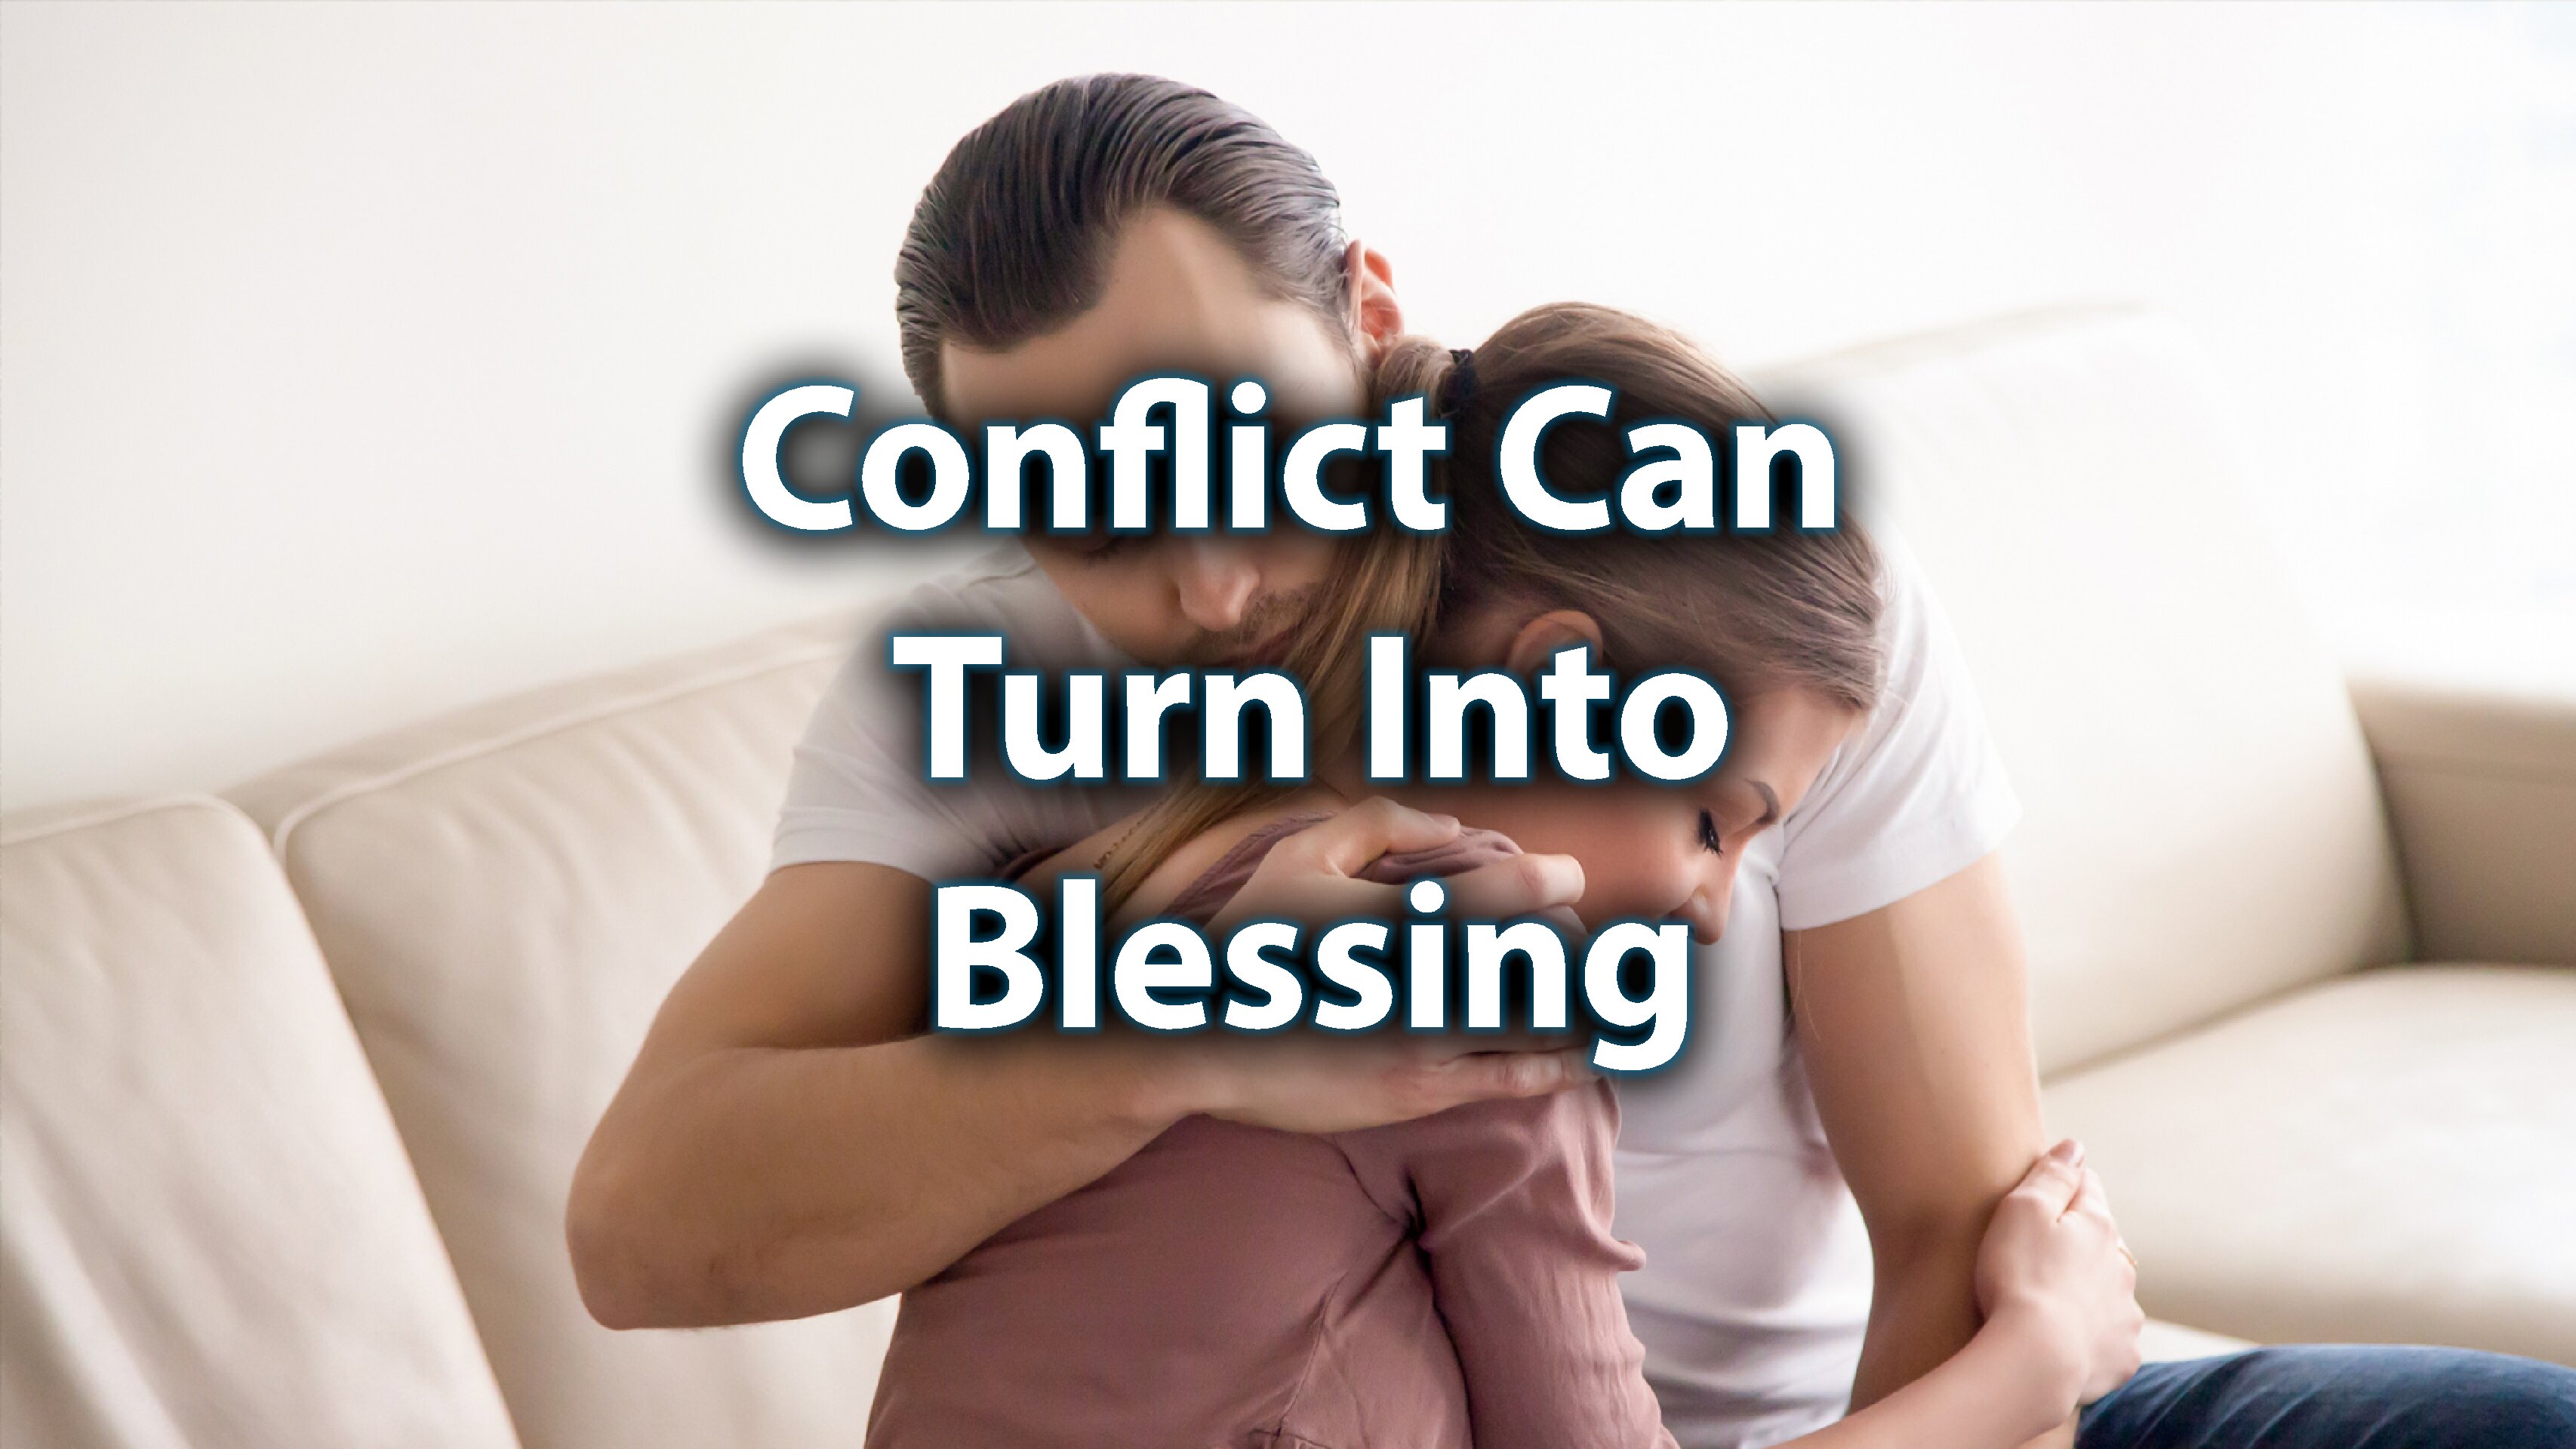 Day 15: Conflict can Turn into Blessing